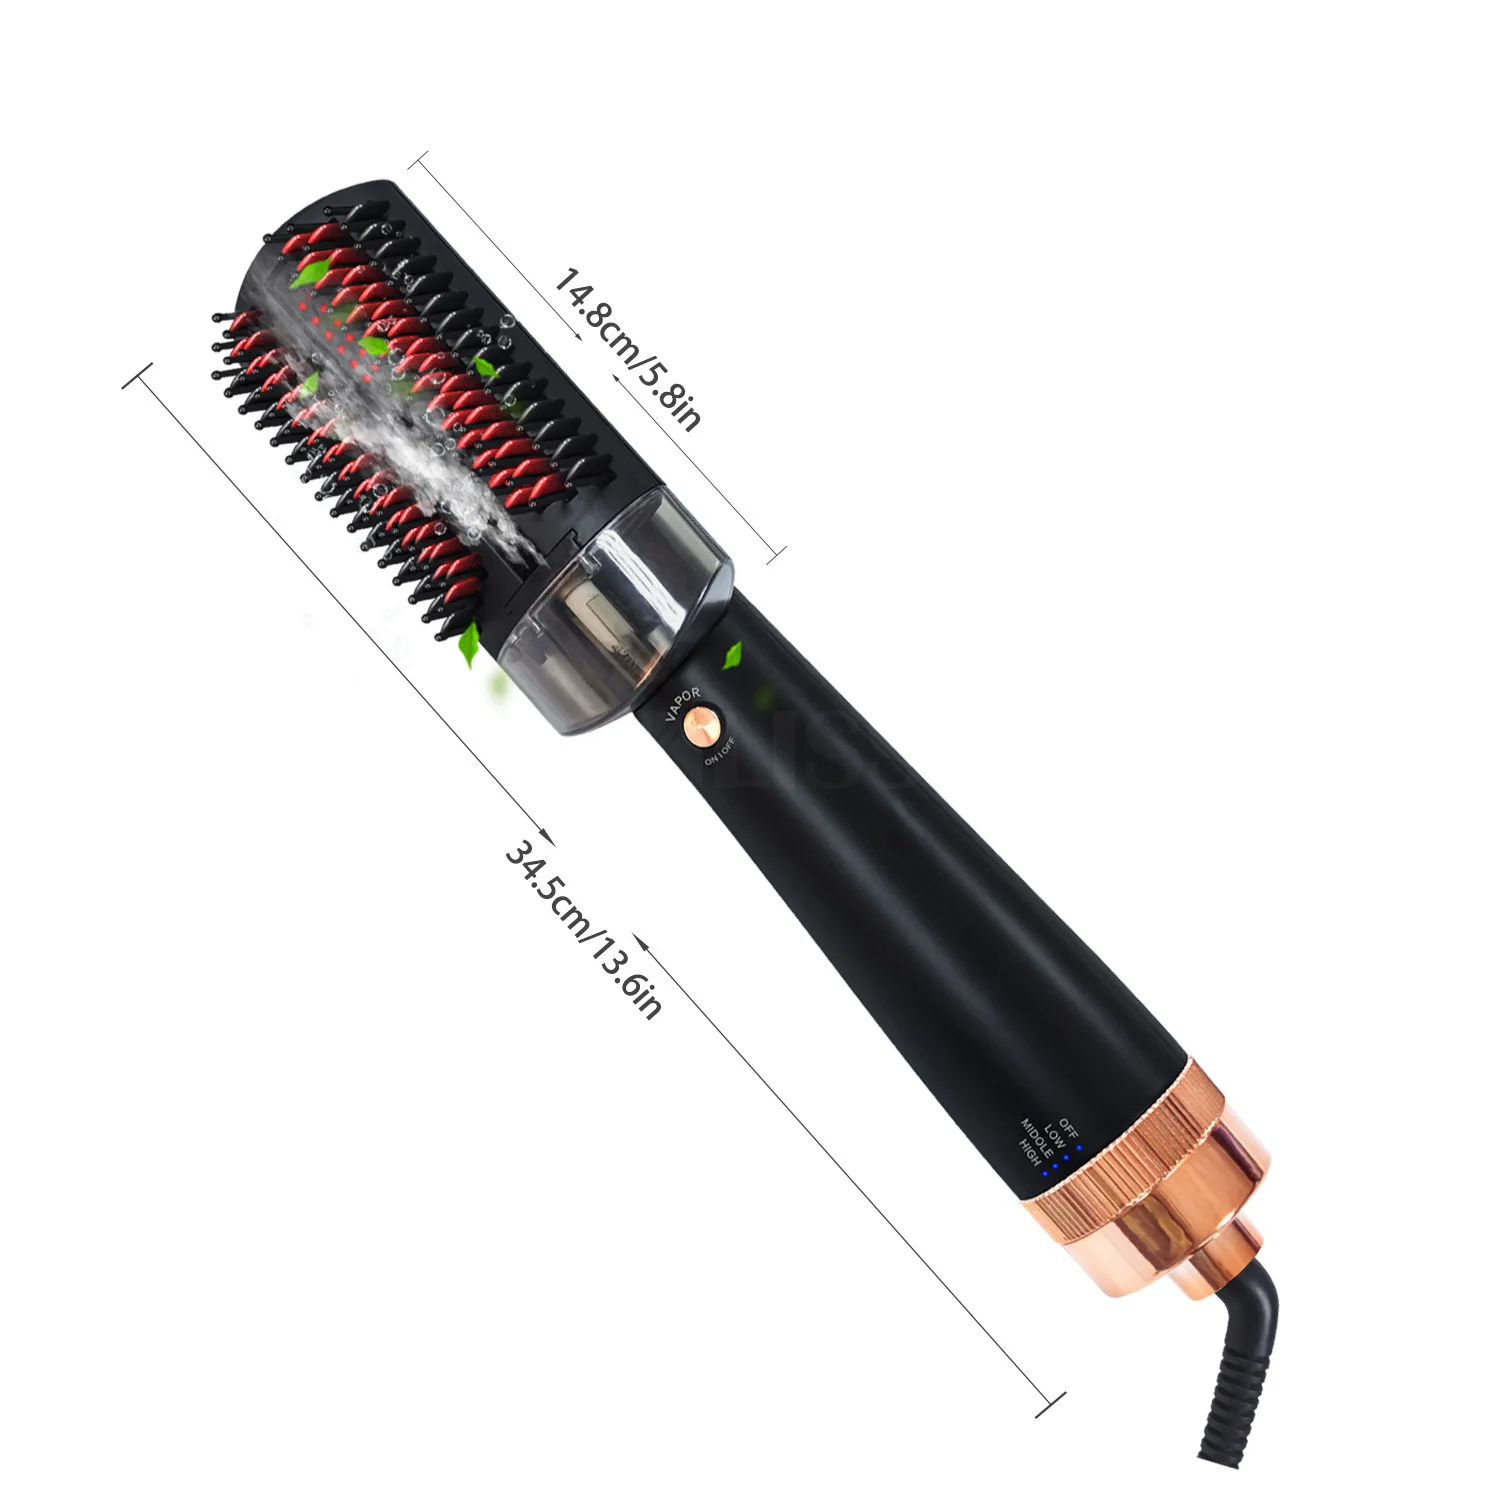 Tourmaline ceramic hot air comb spray hair care curling  straightening dual-use hair dryer infrared hair straightening comb